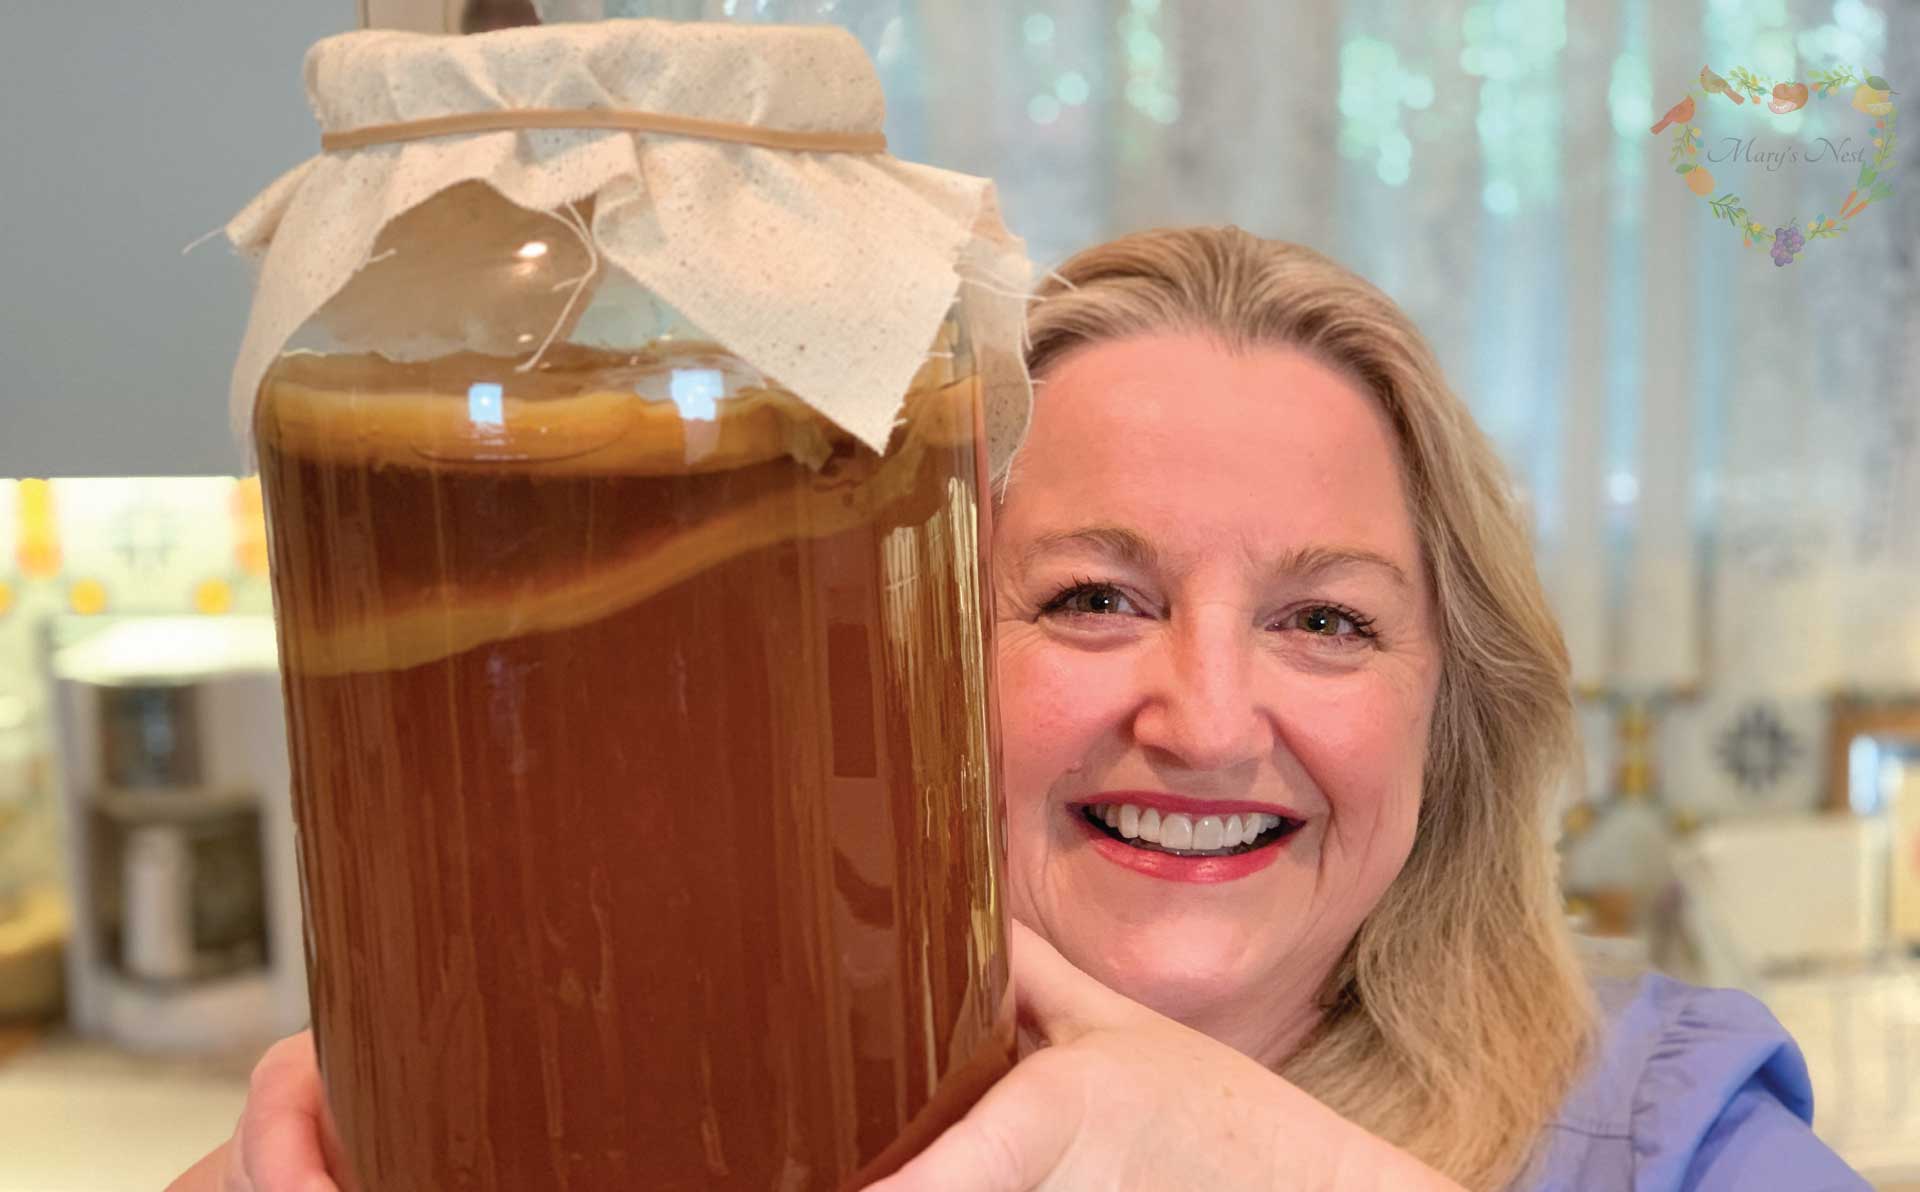 Mary holding a jar with a Kombucha SCOBY.